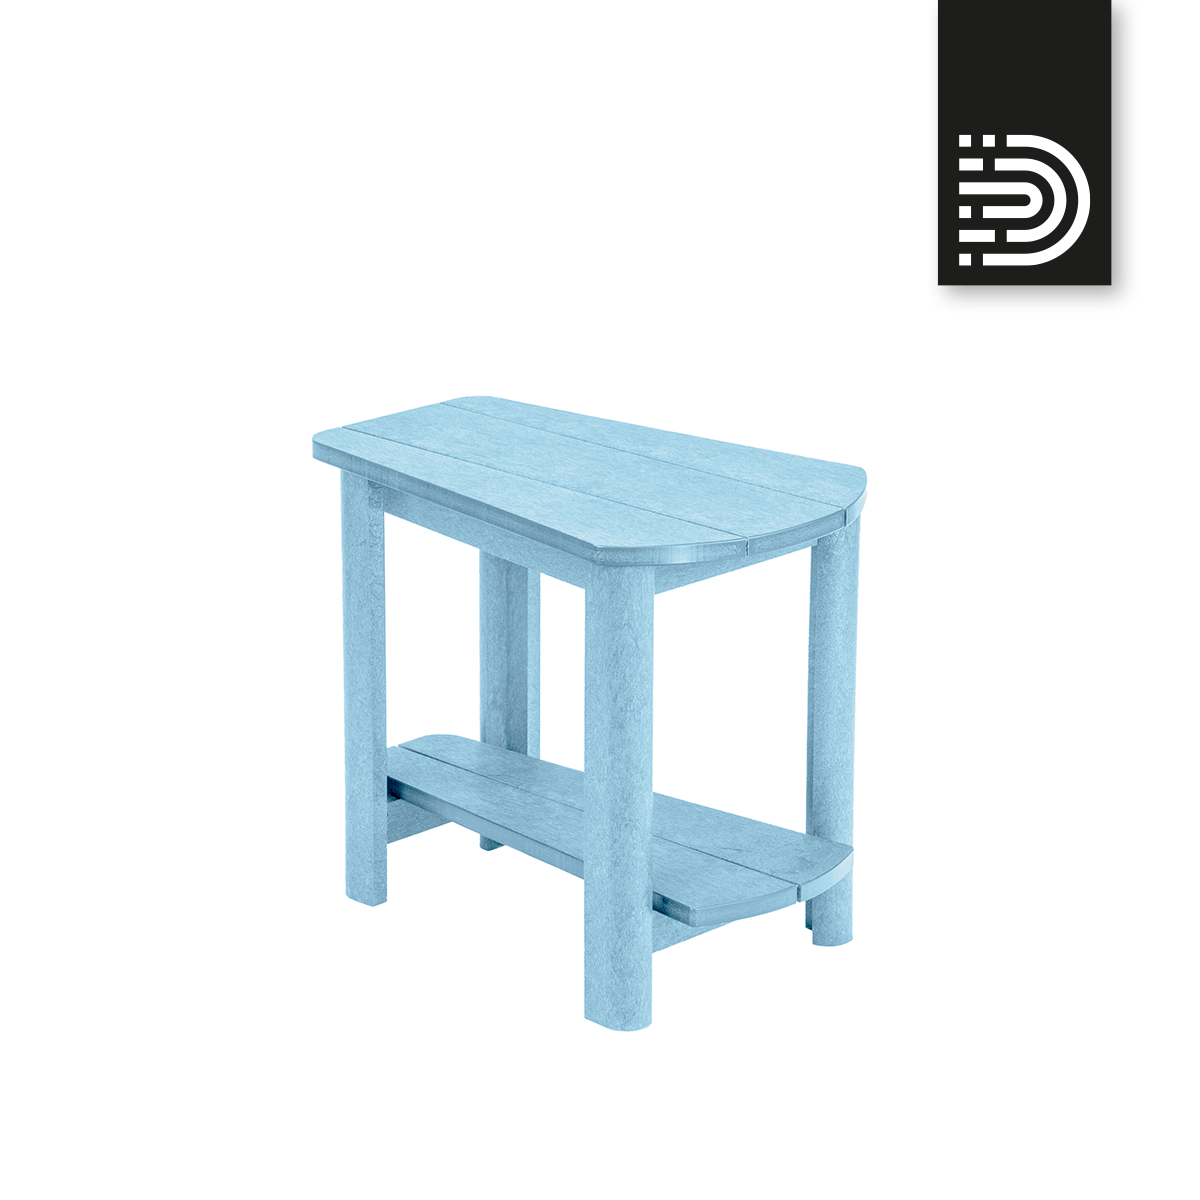 T04 Addy Side Table - Sky blue 12 